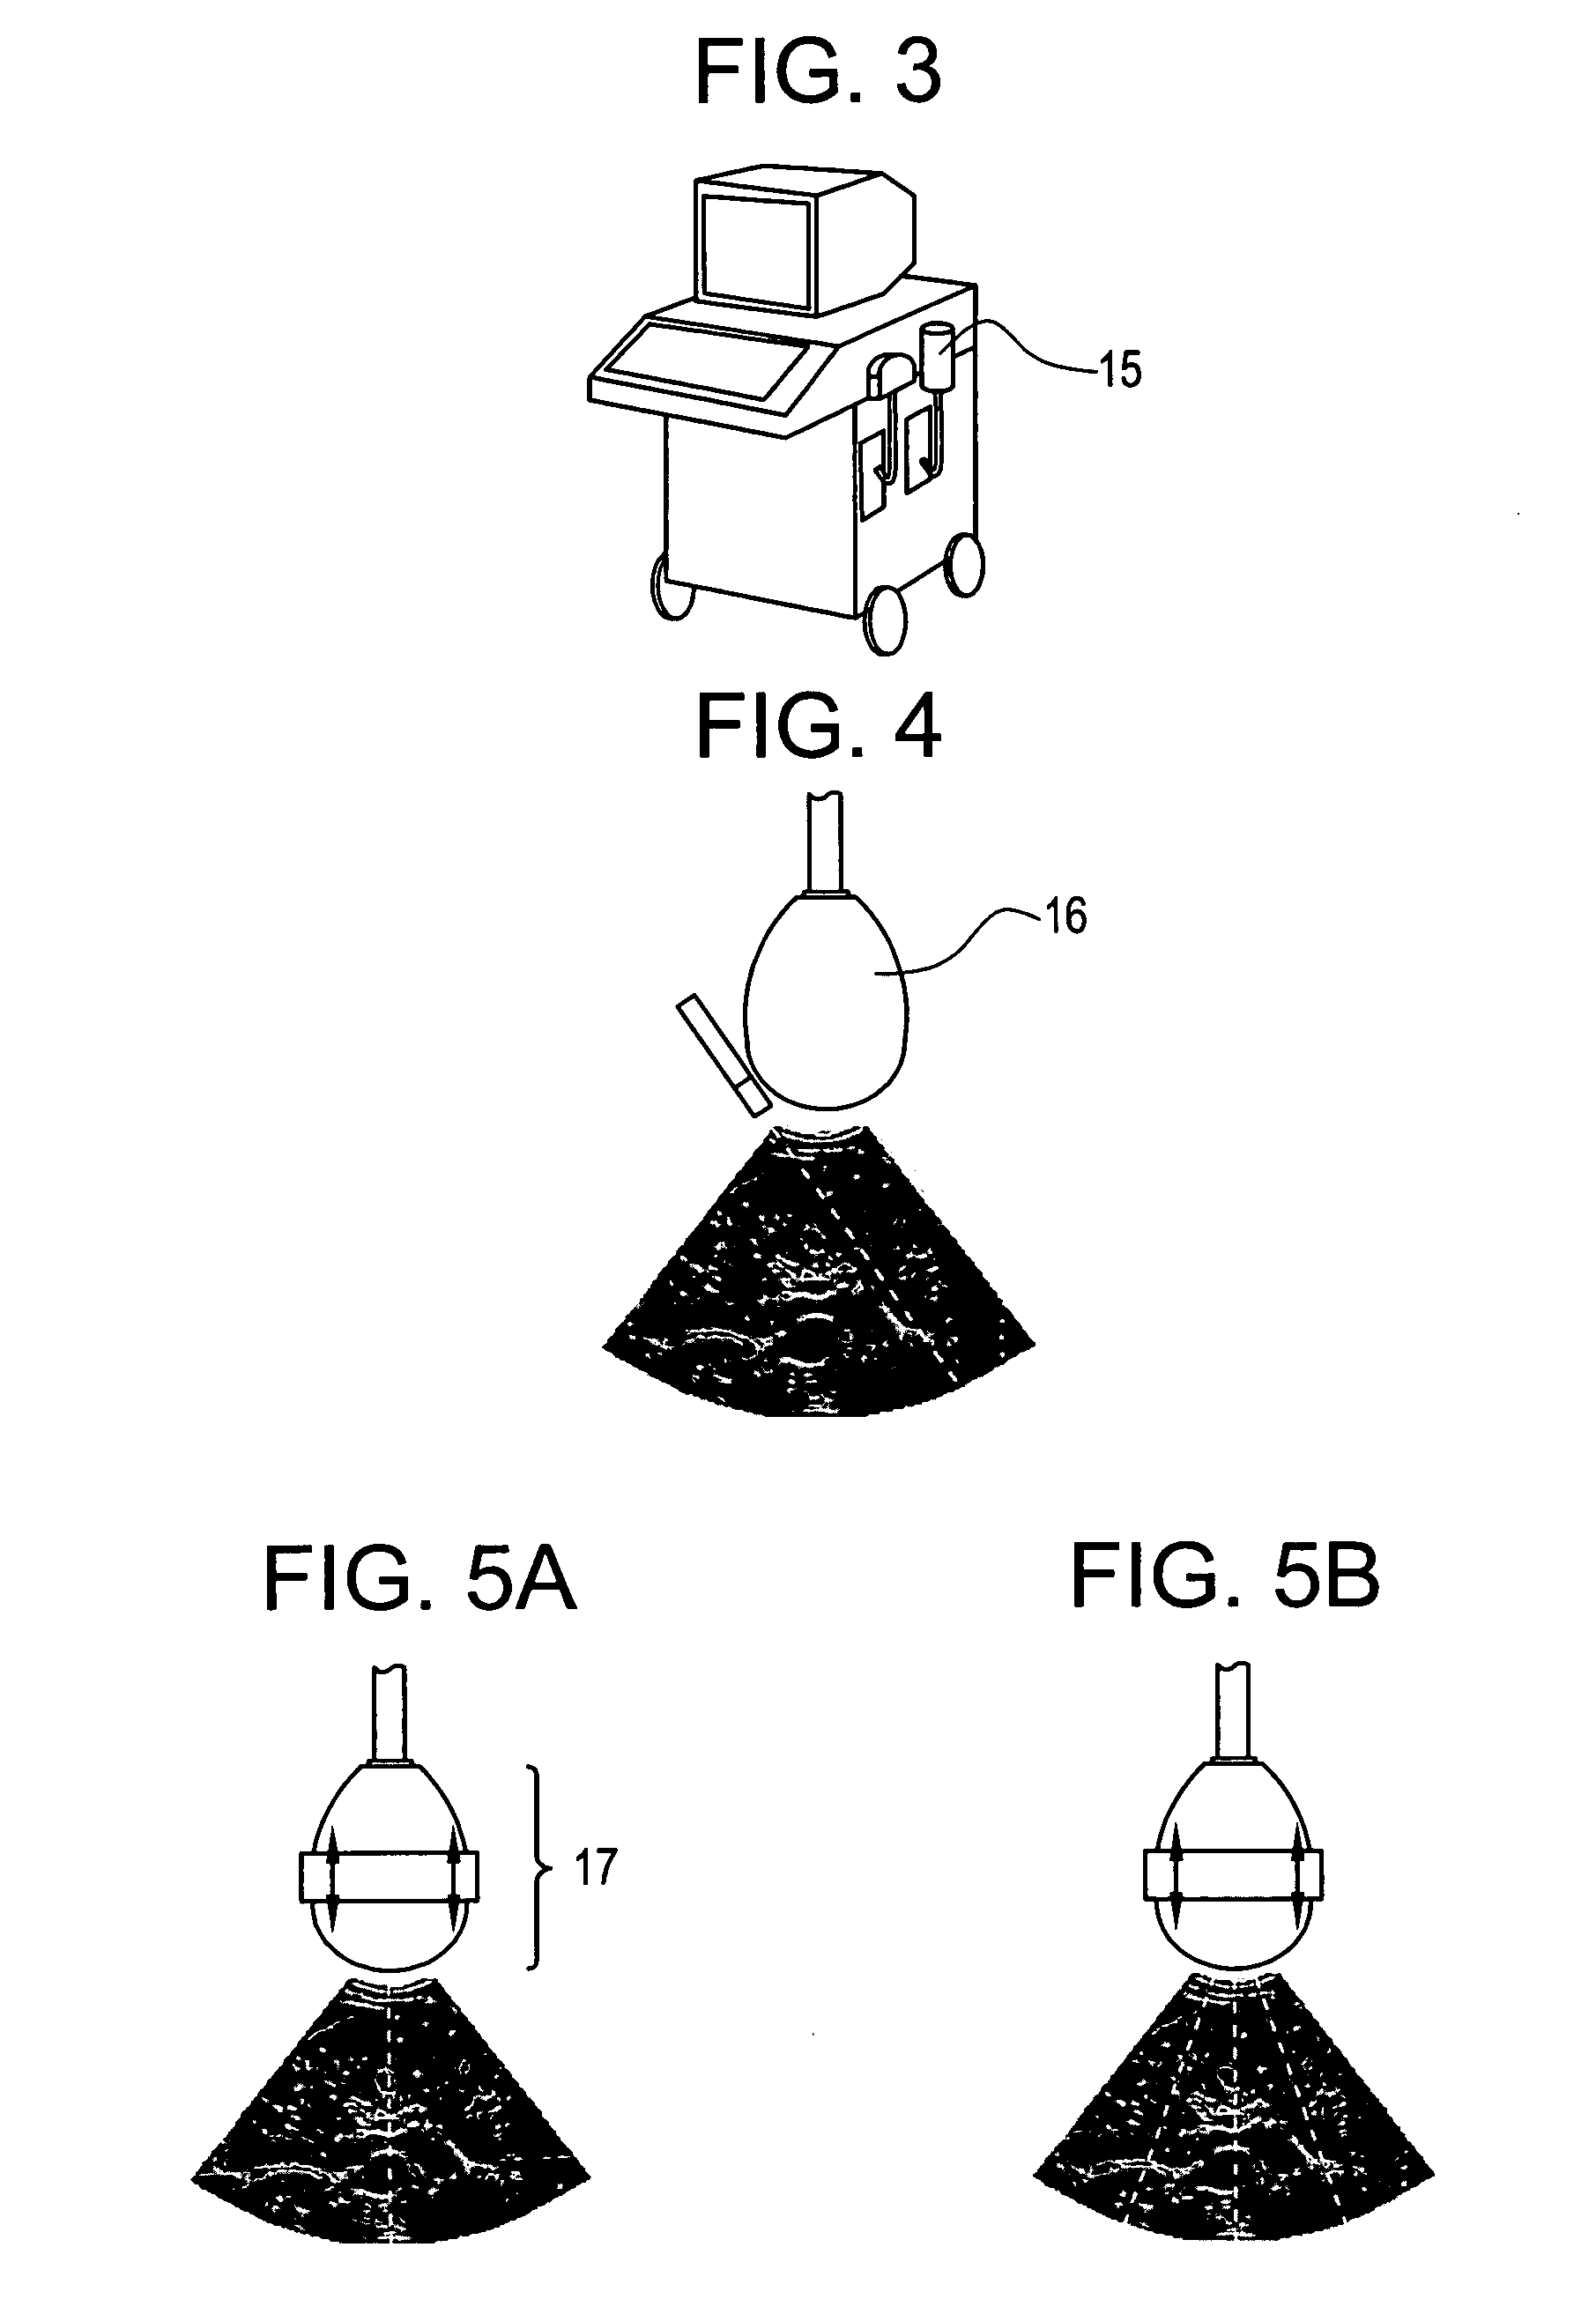 Device and method for measuring the elasticity of a human or animal organ